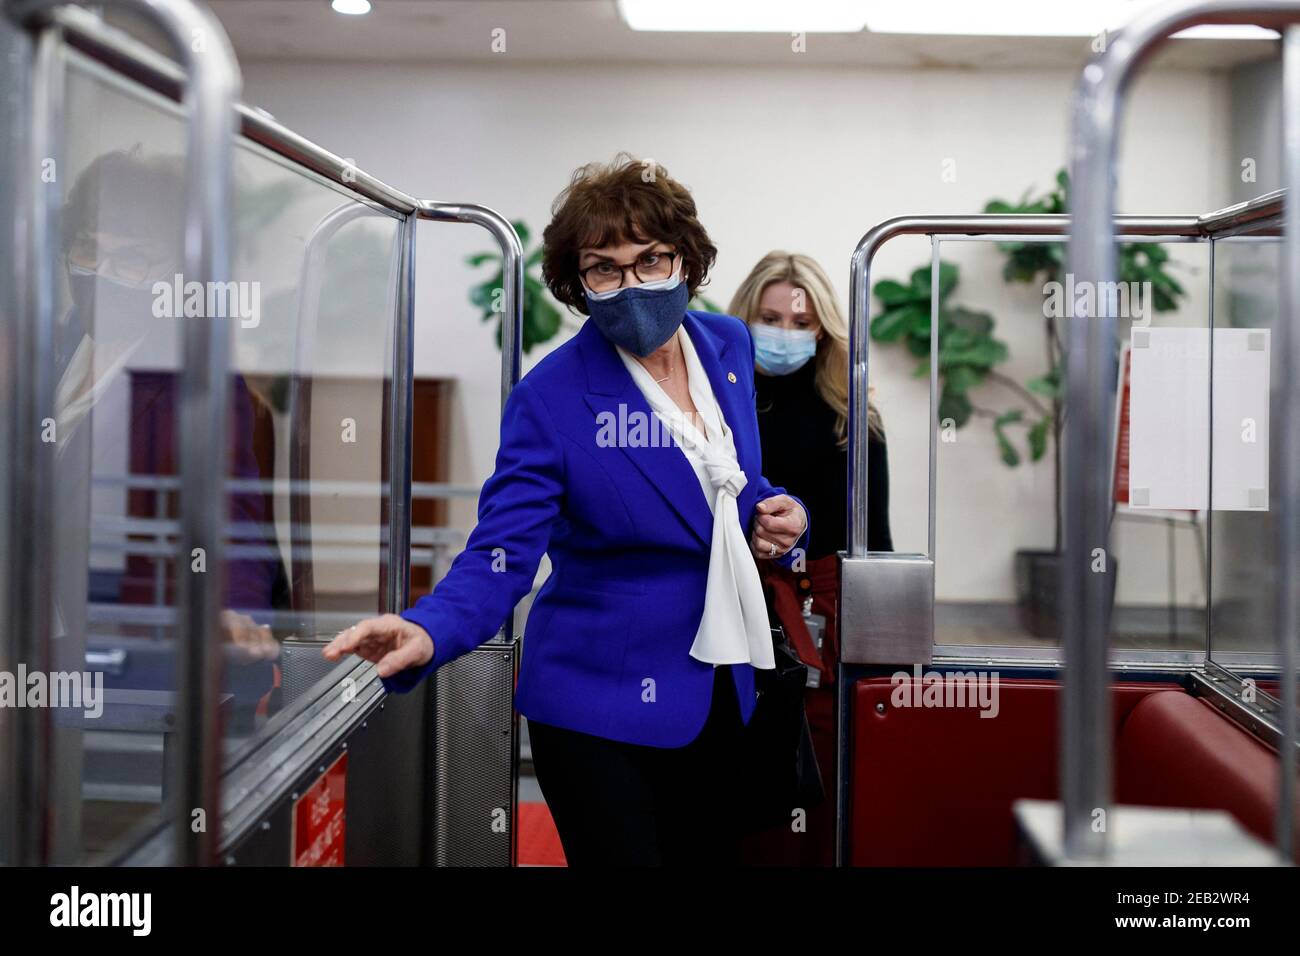 Senator Jacky Rosen, a Democrat from Nevada, wears a protective mask while boarding the Senate Subway at the U.S. Capitol in Washington, D.C., U.S., on Thursday, Feb. 11, 2021. House prosecutors used the second day of Donald Trump's impeachment trial to detail a months-long campaign by the former president to stoke hatred and encourage violence over the election results that they said culminated in the mob attack on the U.S. Capitol that he then did little to stop. Photo by Ting Shen/Pool/ABACAPRESS.COM Stock Photo